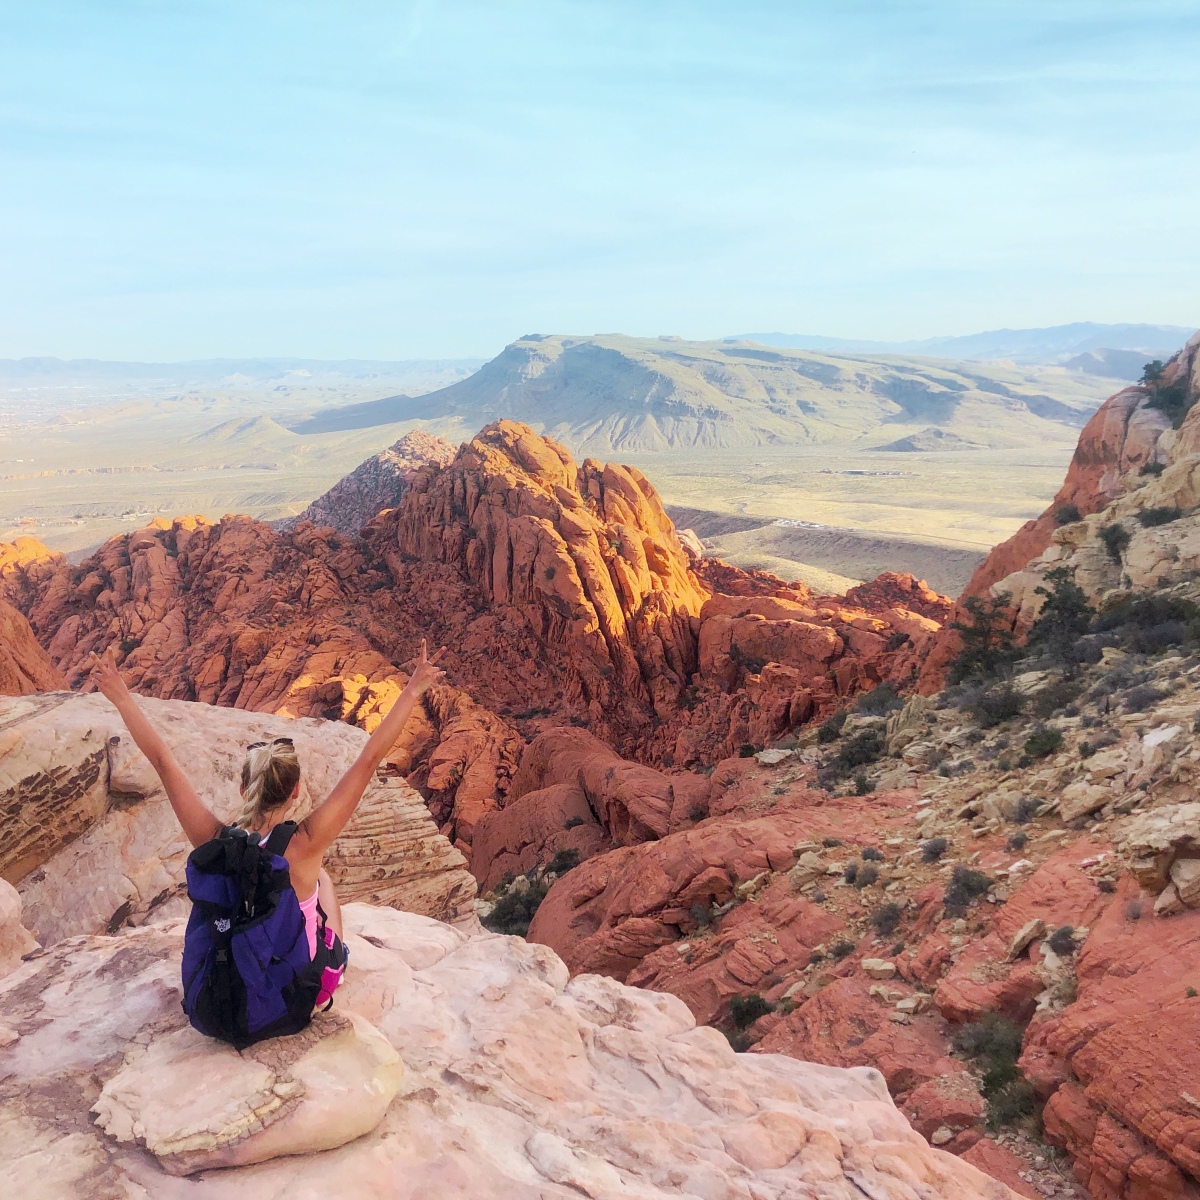 Hiking Red Rock Canyon: Best Las Vegas Hikes- Calico Hills